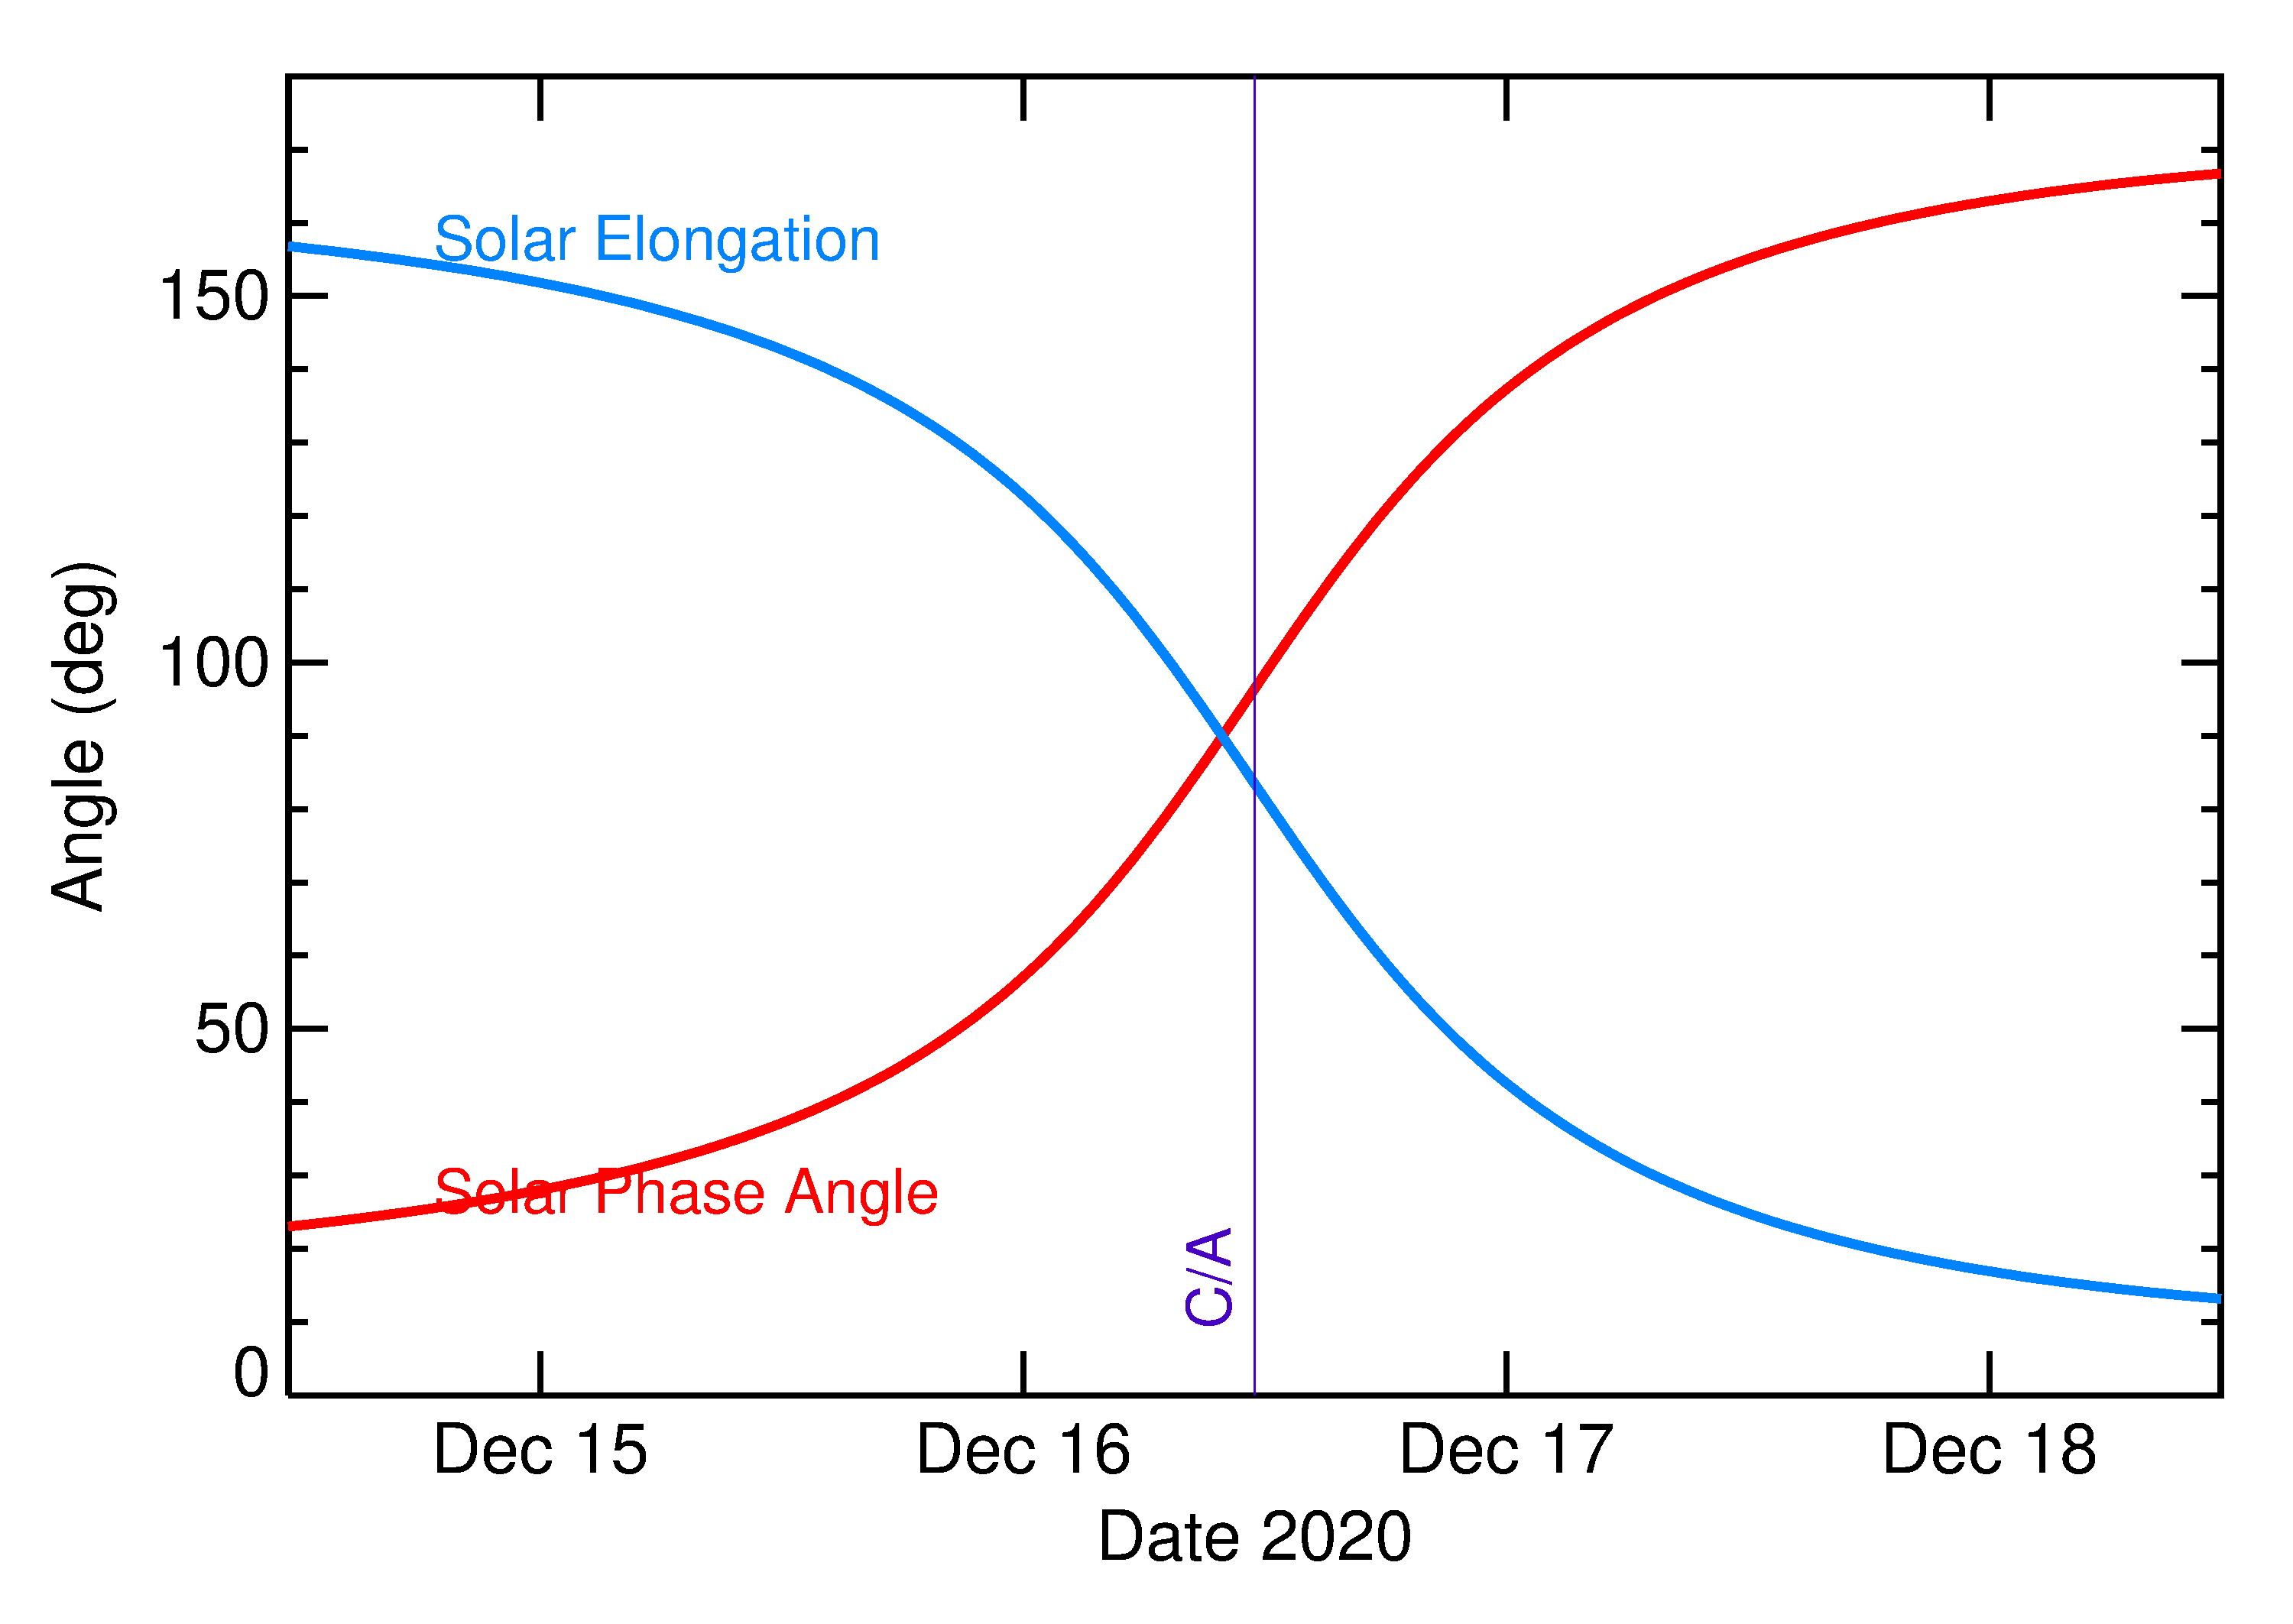 Solar Elongation and Solar Phase Angle of 2020 XF4 in the days around closest approach